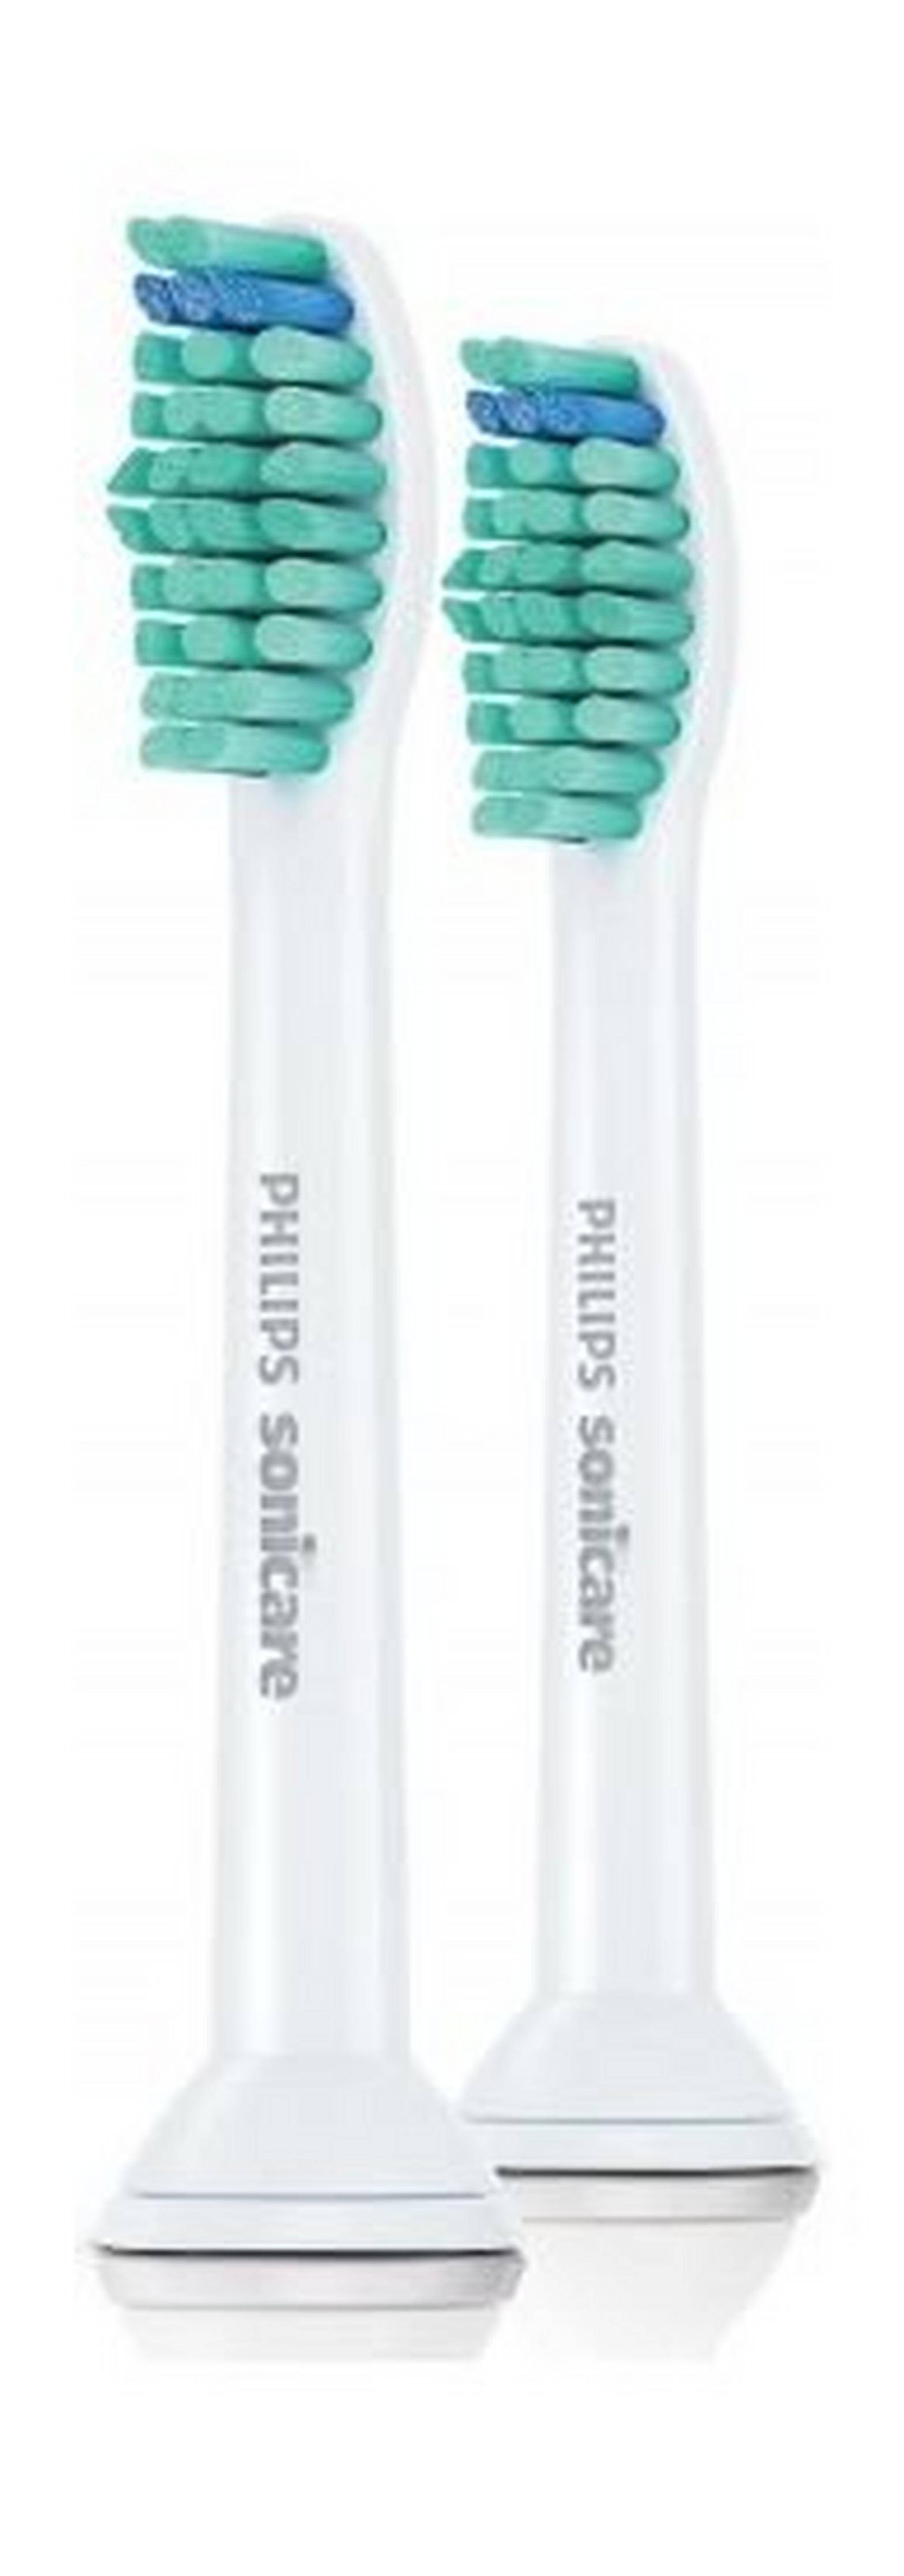 Philips Sonicare ProResults Standard Sonic Toothbrush Heads (HX6012/07)